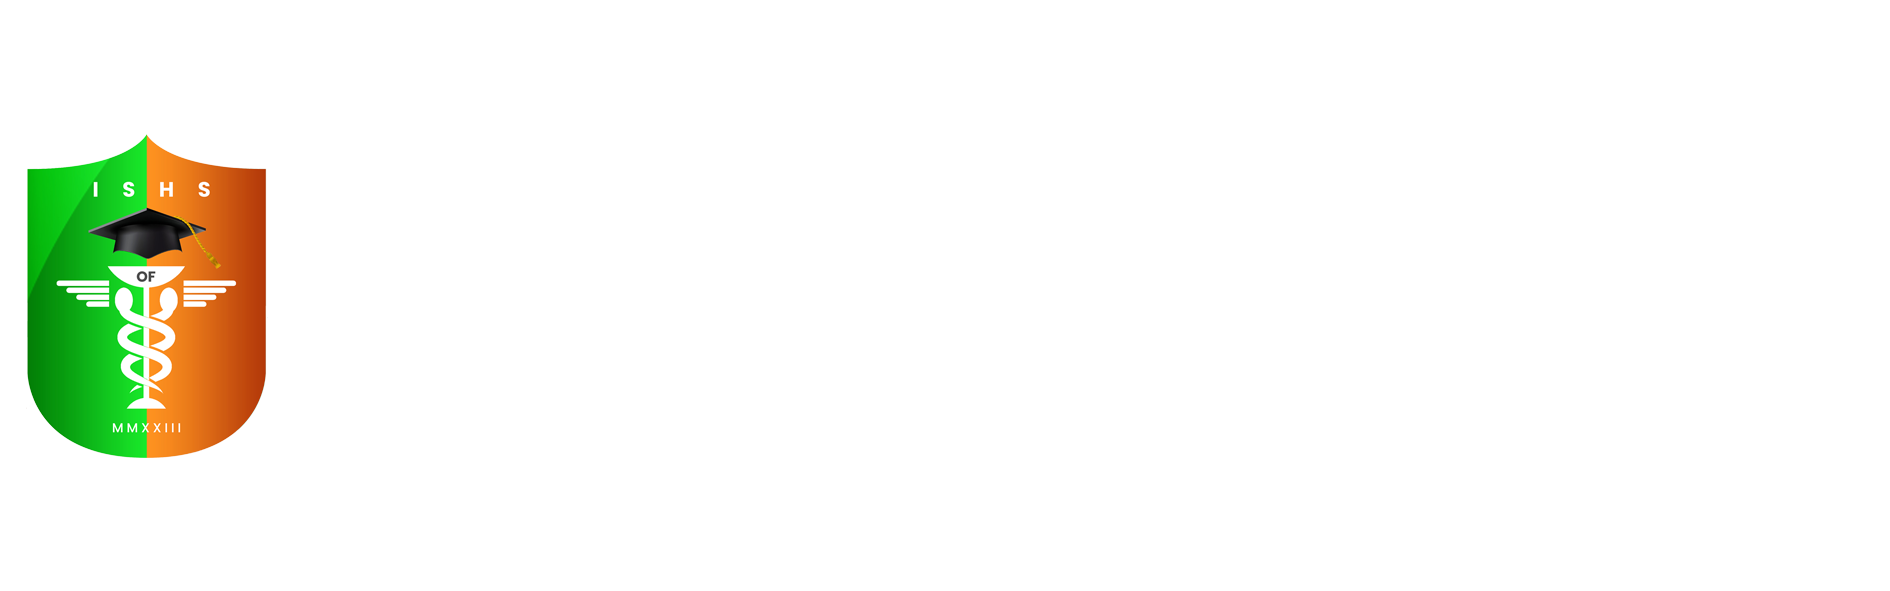 IMAGHE School of Health Science - ISHS